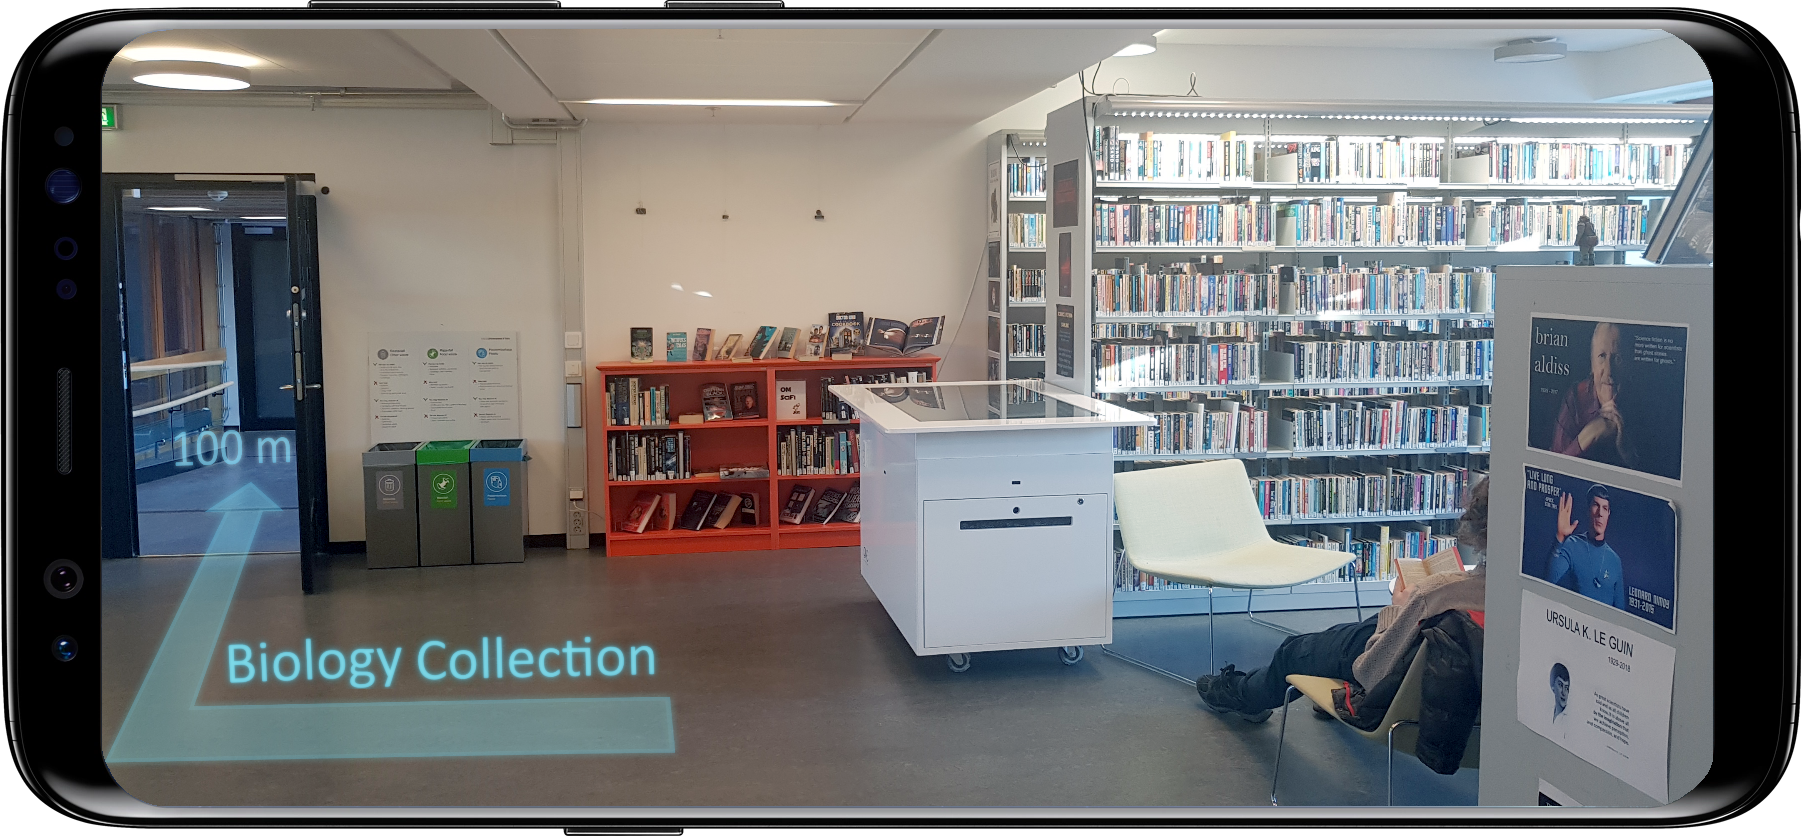 Mobile phone screen with AR directions and arrow superimposed on camera view of library scne, with moveable object and person visible.